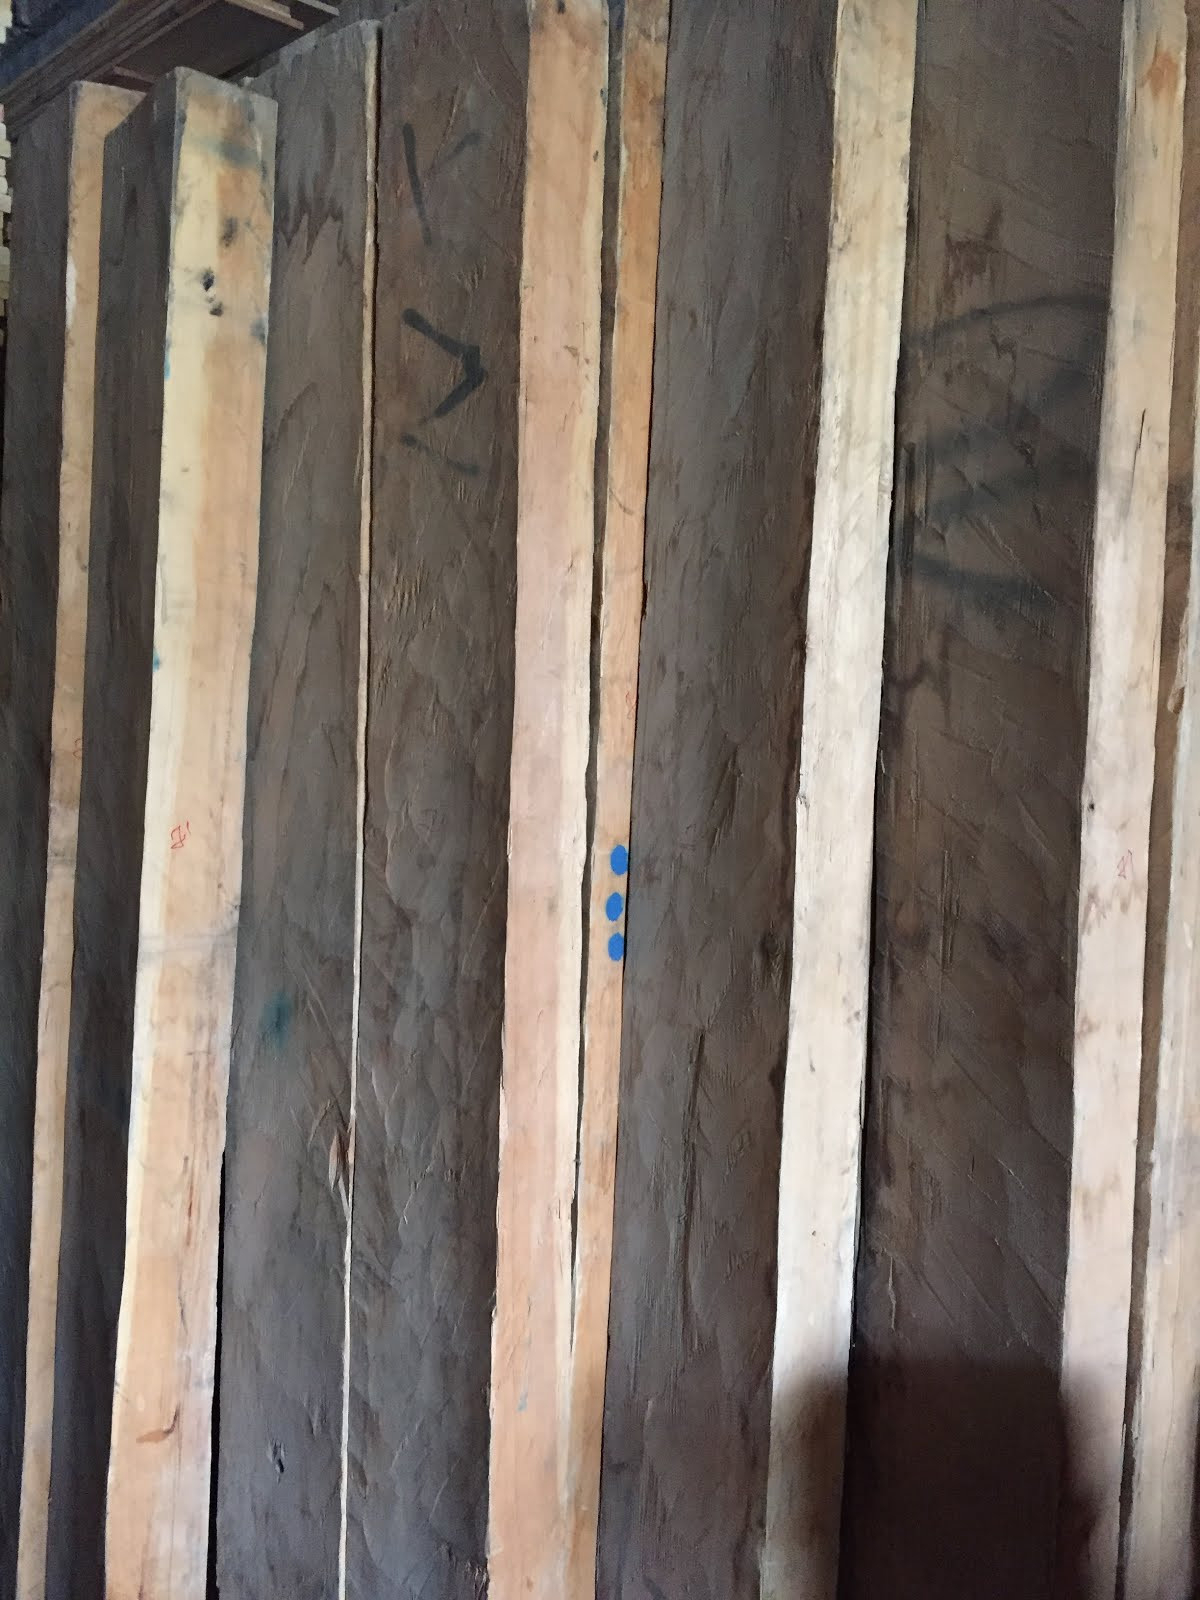 used hardwood flooring for sale of ittihad timber lahore pakistan types of wood with prices in pak rupees throughout pure afghani deear o¯uu o¯o§o± o¯ uo§ o±